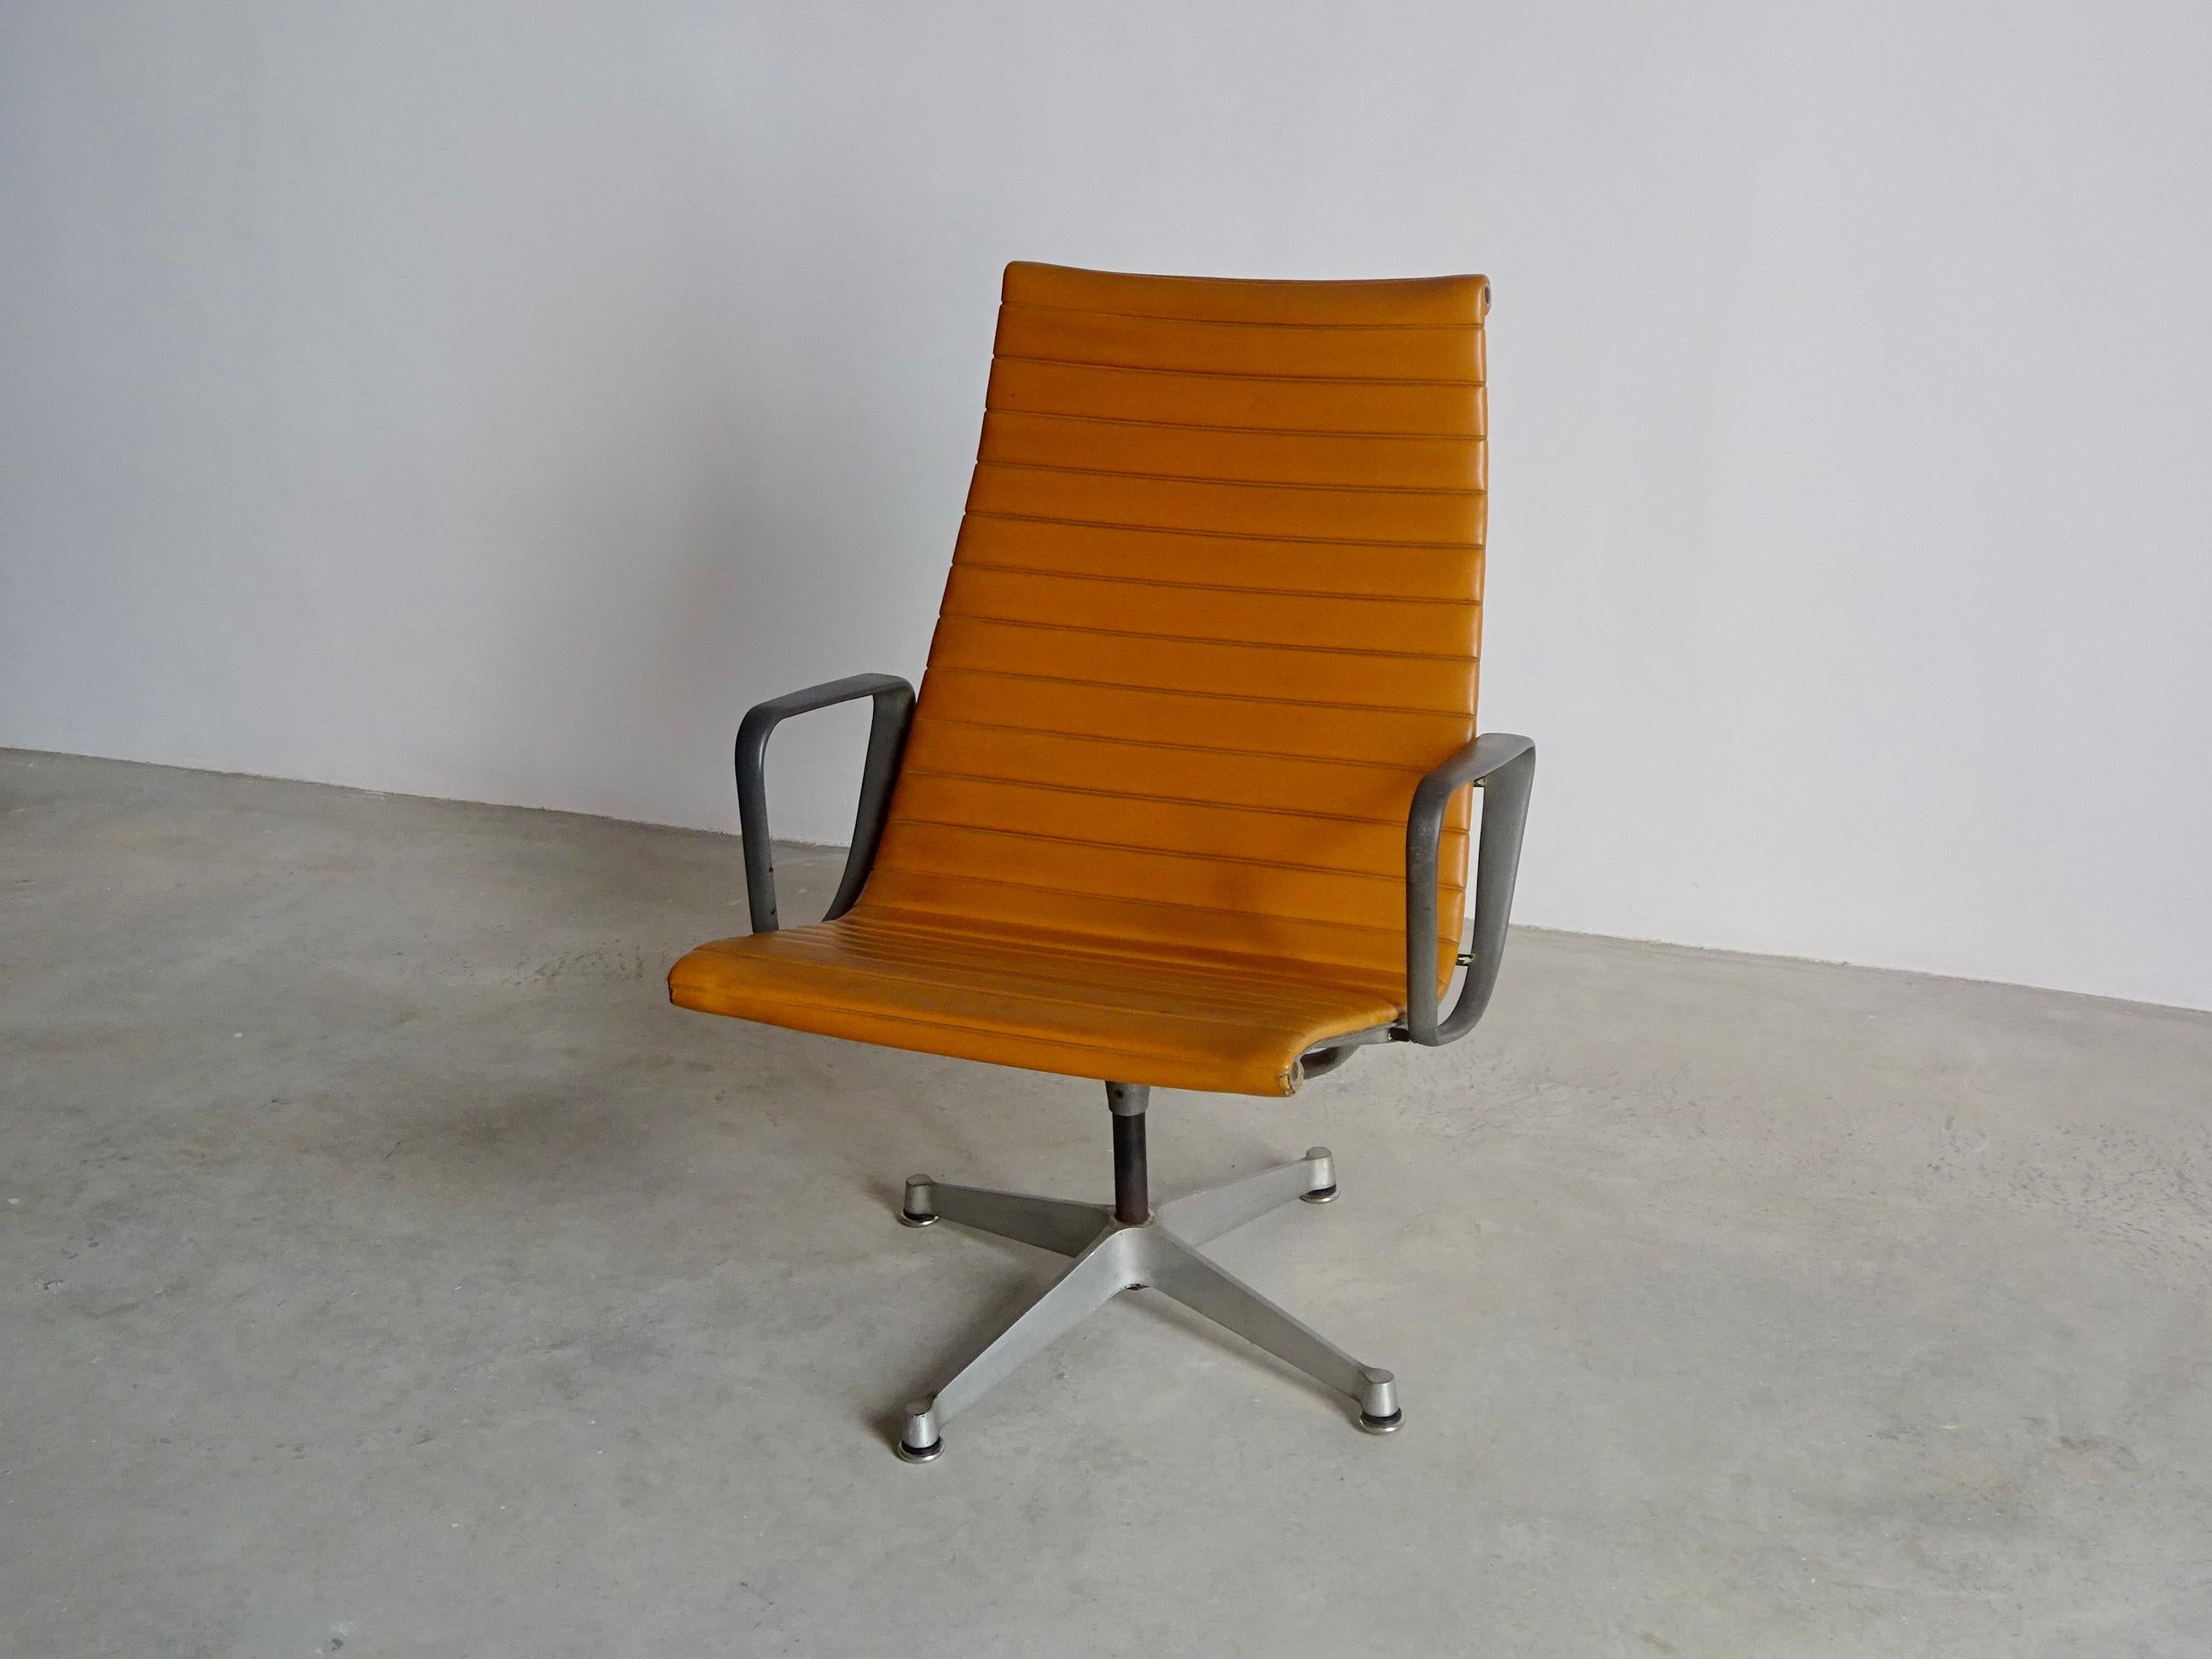 Rare early edition “EA116” designed by Charles and Ray Eames for Herman Miller in 1958. The stamp “Herman Miller Patent Pending” proves the antiquity of the piece. The aluminum structure has signs of wear and tear over the years, the upholstered